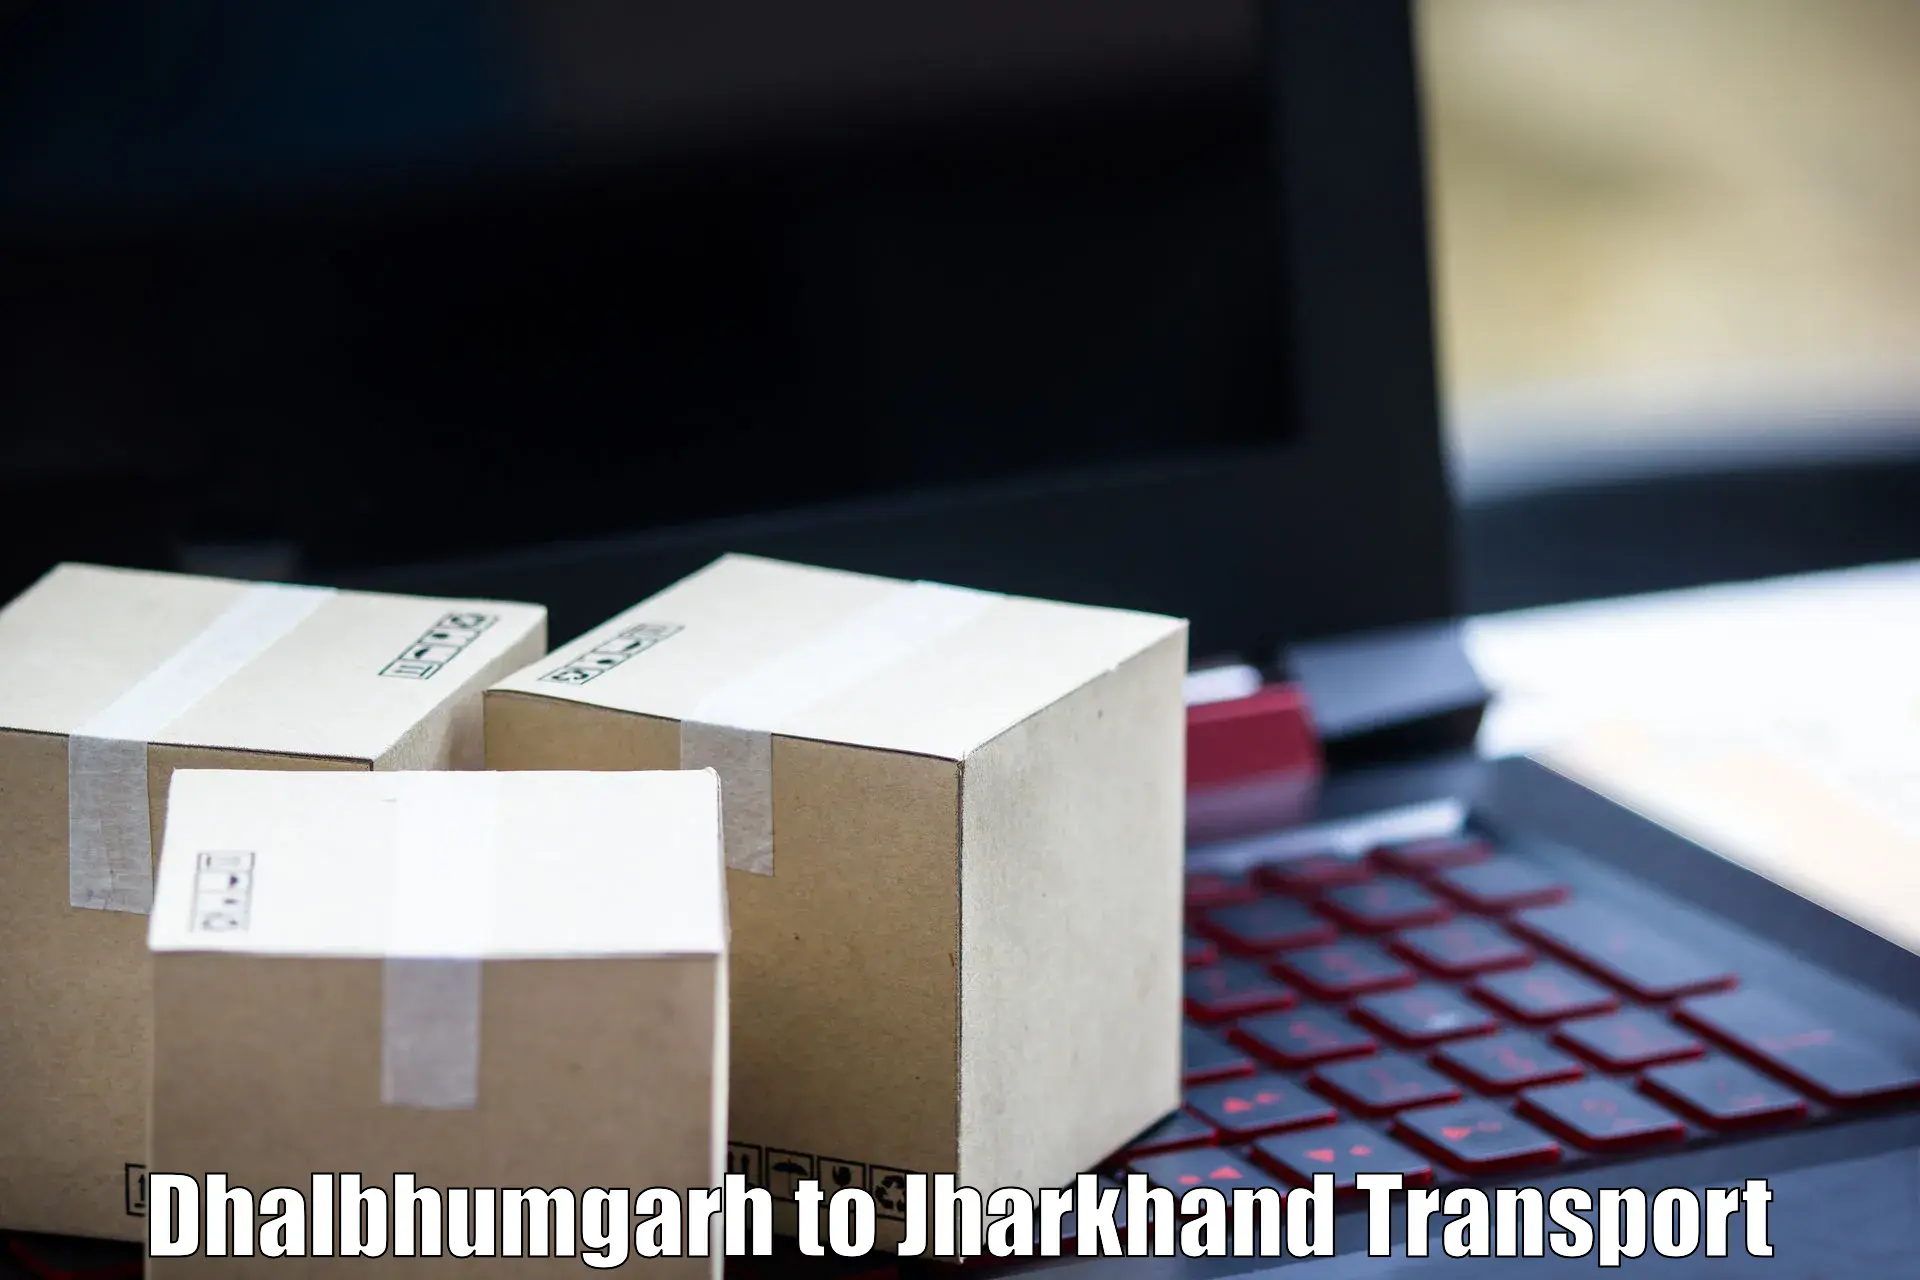 Container transportation services Dhalbhumgarh to Jharkhand